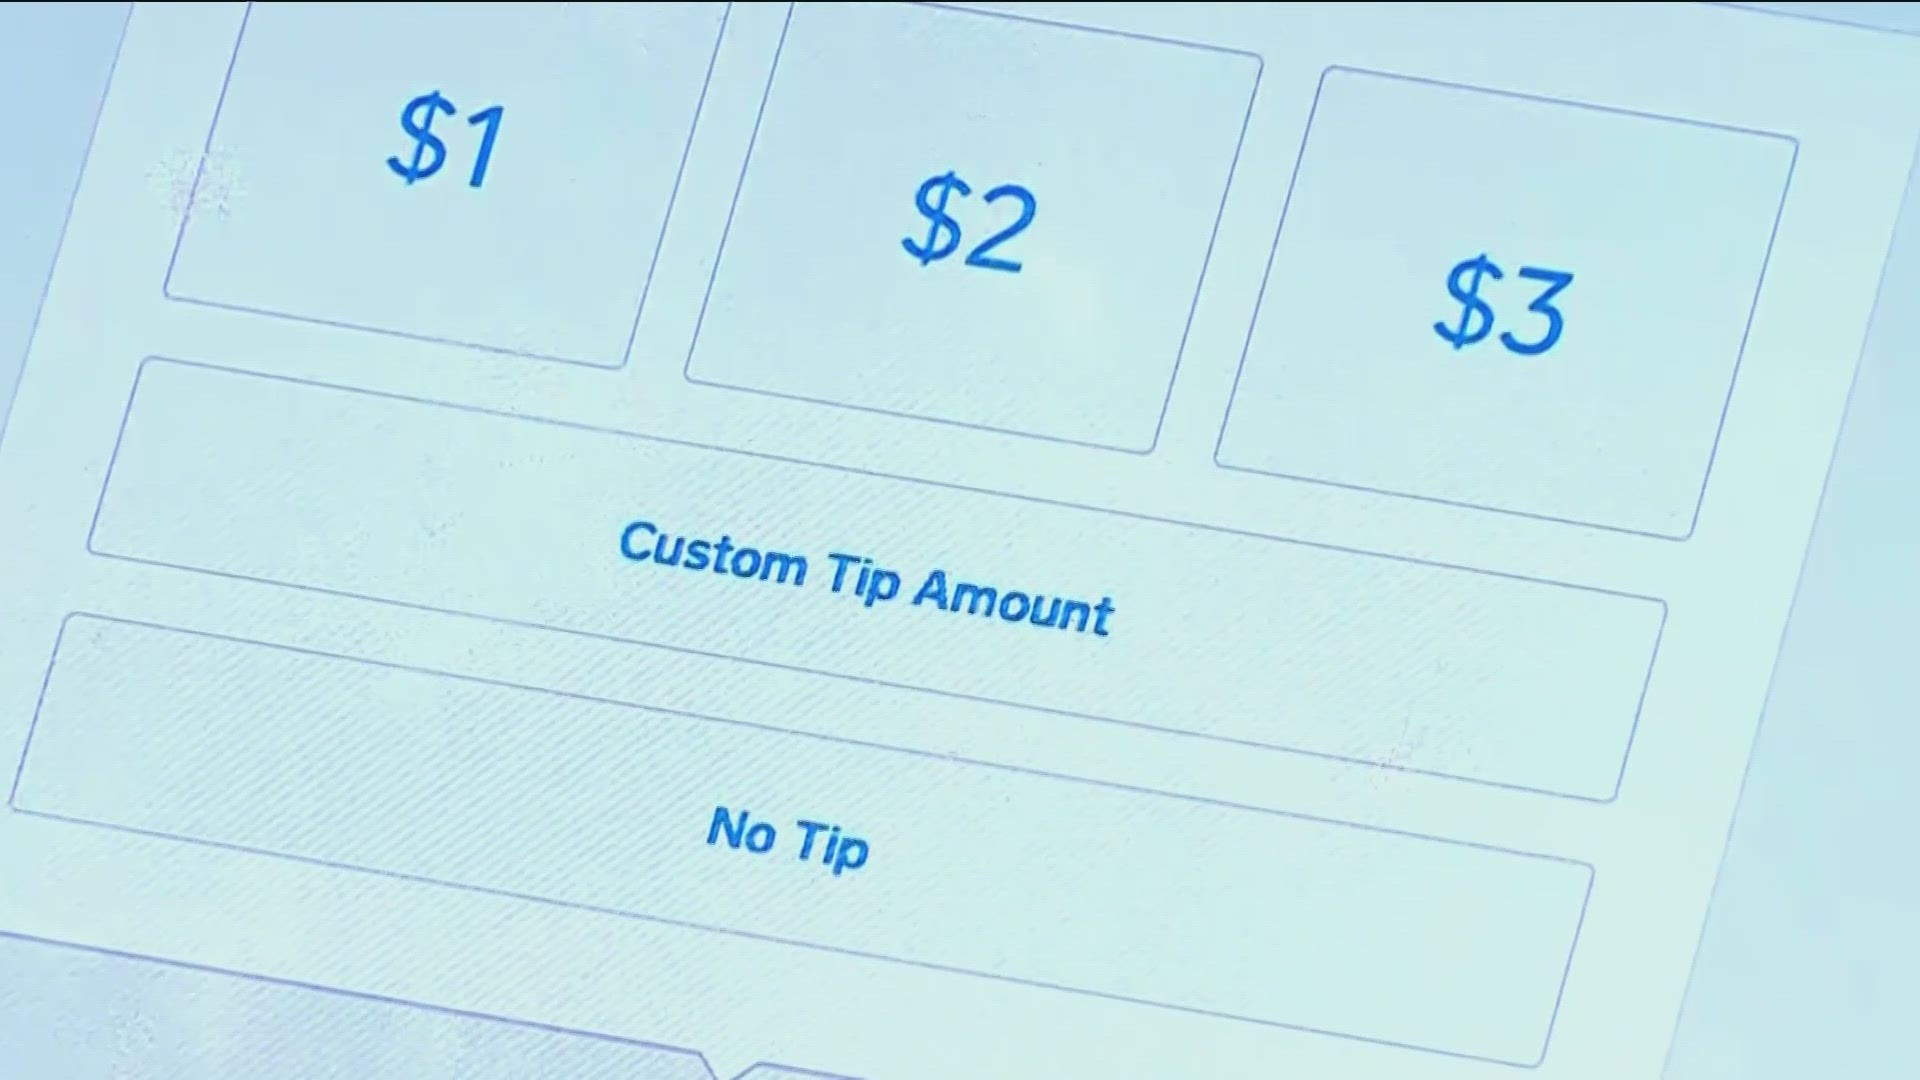 Tipping at selfcheckout machines more prevalent